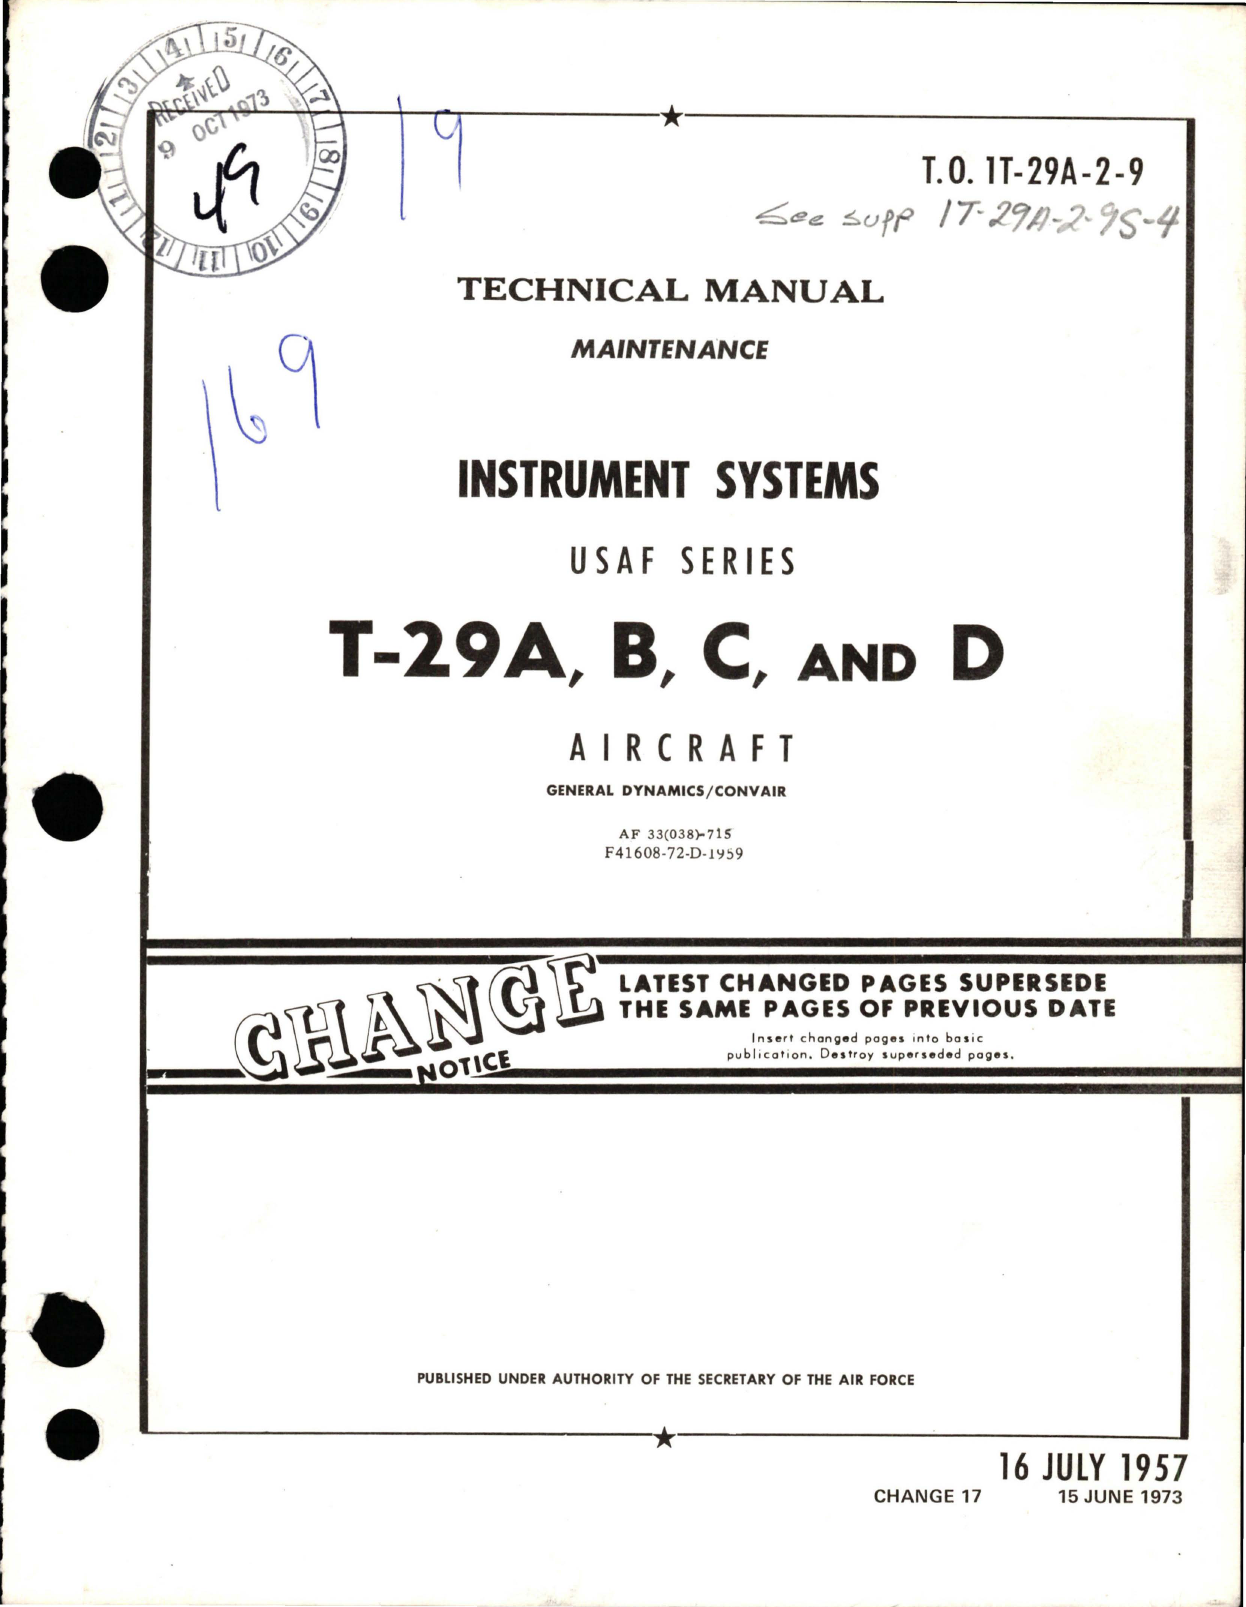 Sample page 1 from AirCorps Library document: Maintenance for Instrument Systems - T-29A, T-29B, T-29C and T-29D